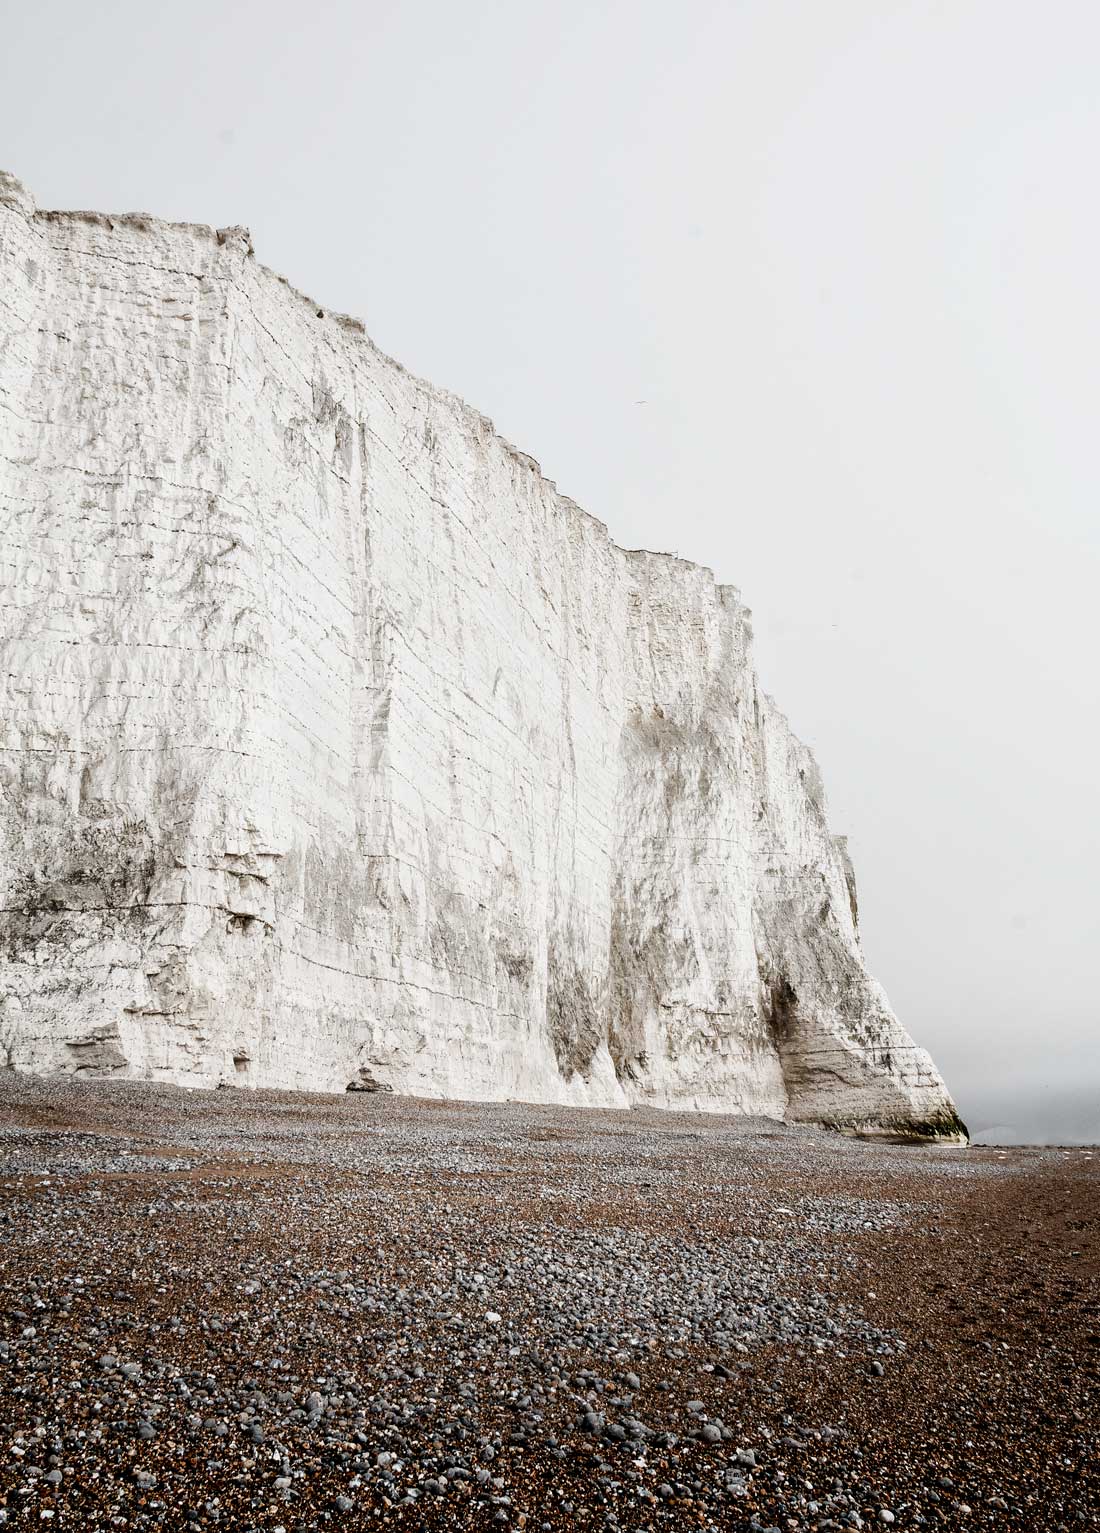 The white cliffs of England - a travel guide to The Seven Sisters